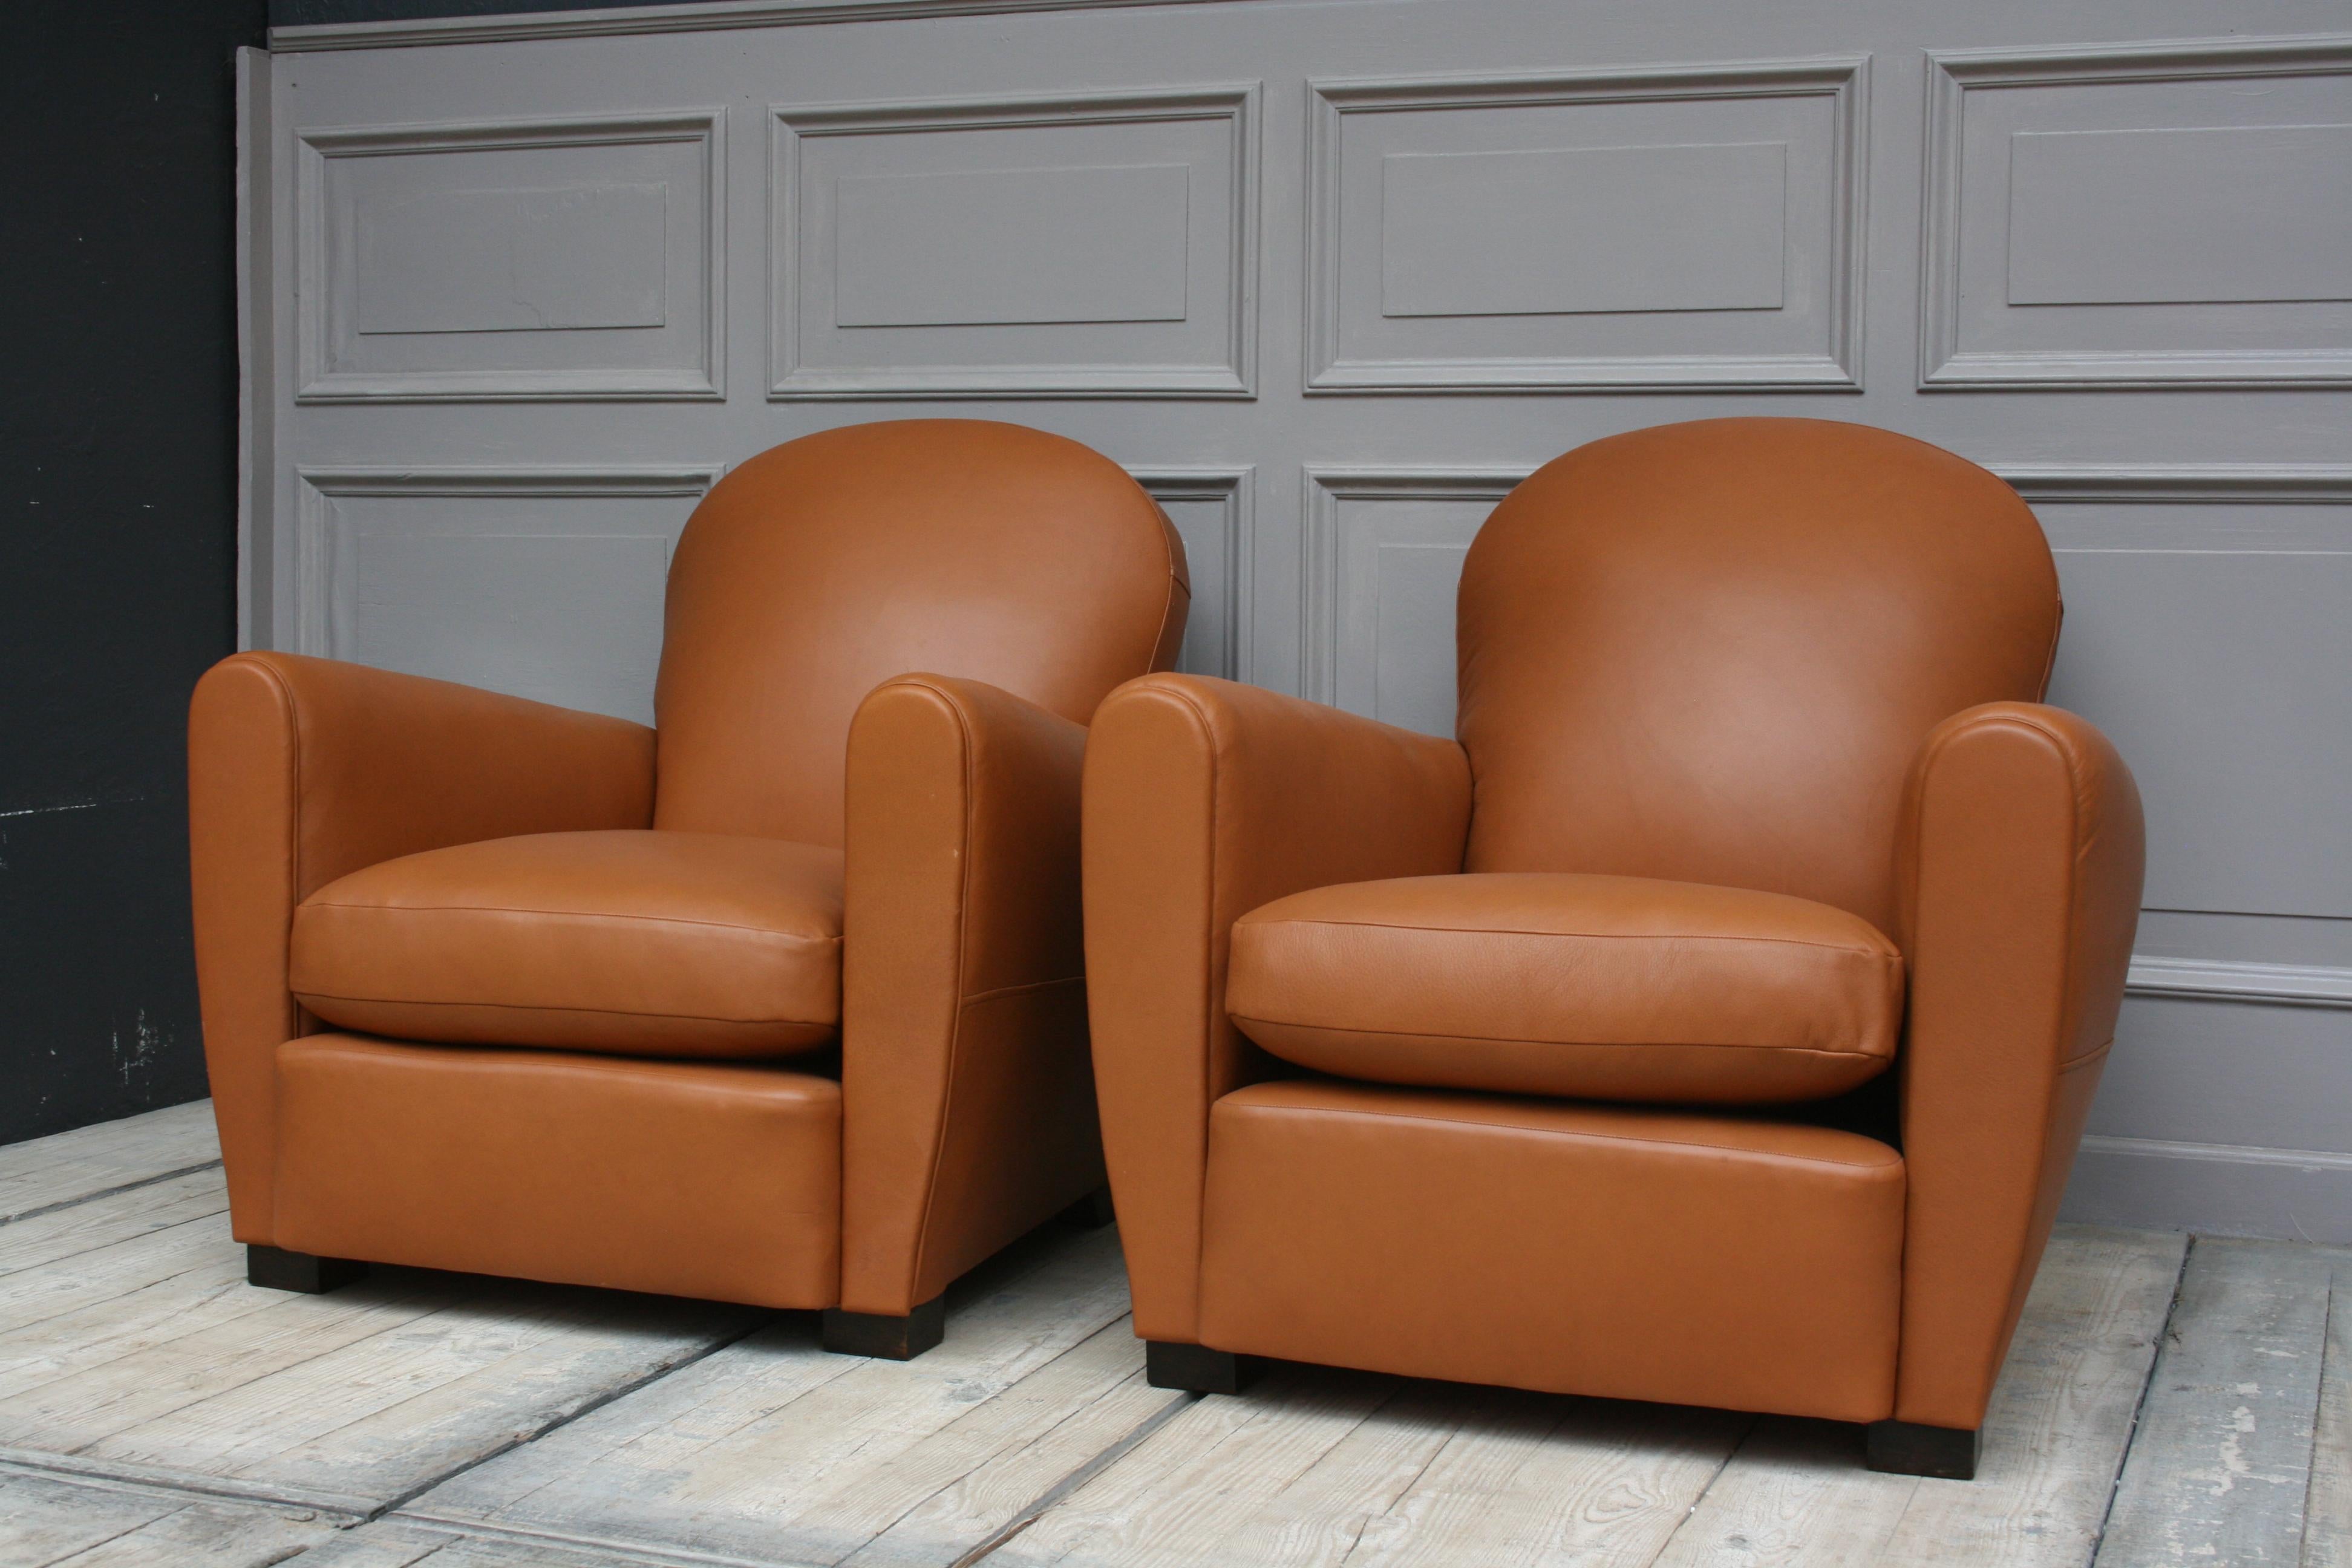 Pair of original Art Deco leather club chairs, completely restored and newly upholstered in leather.
Photos of the state of the chairs before are available, as well as photos of the restoration.